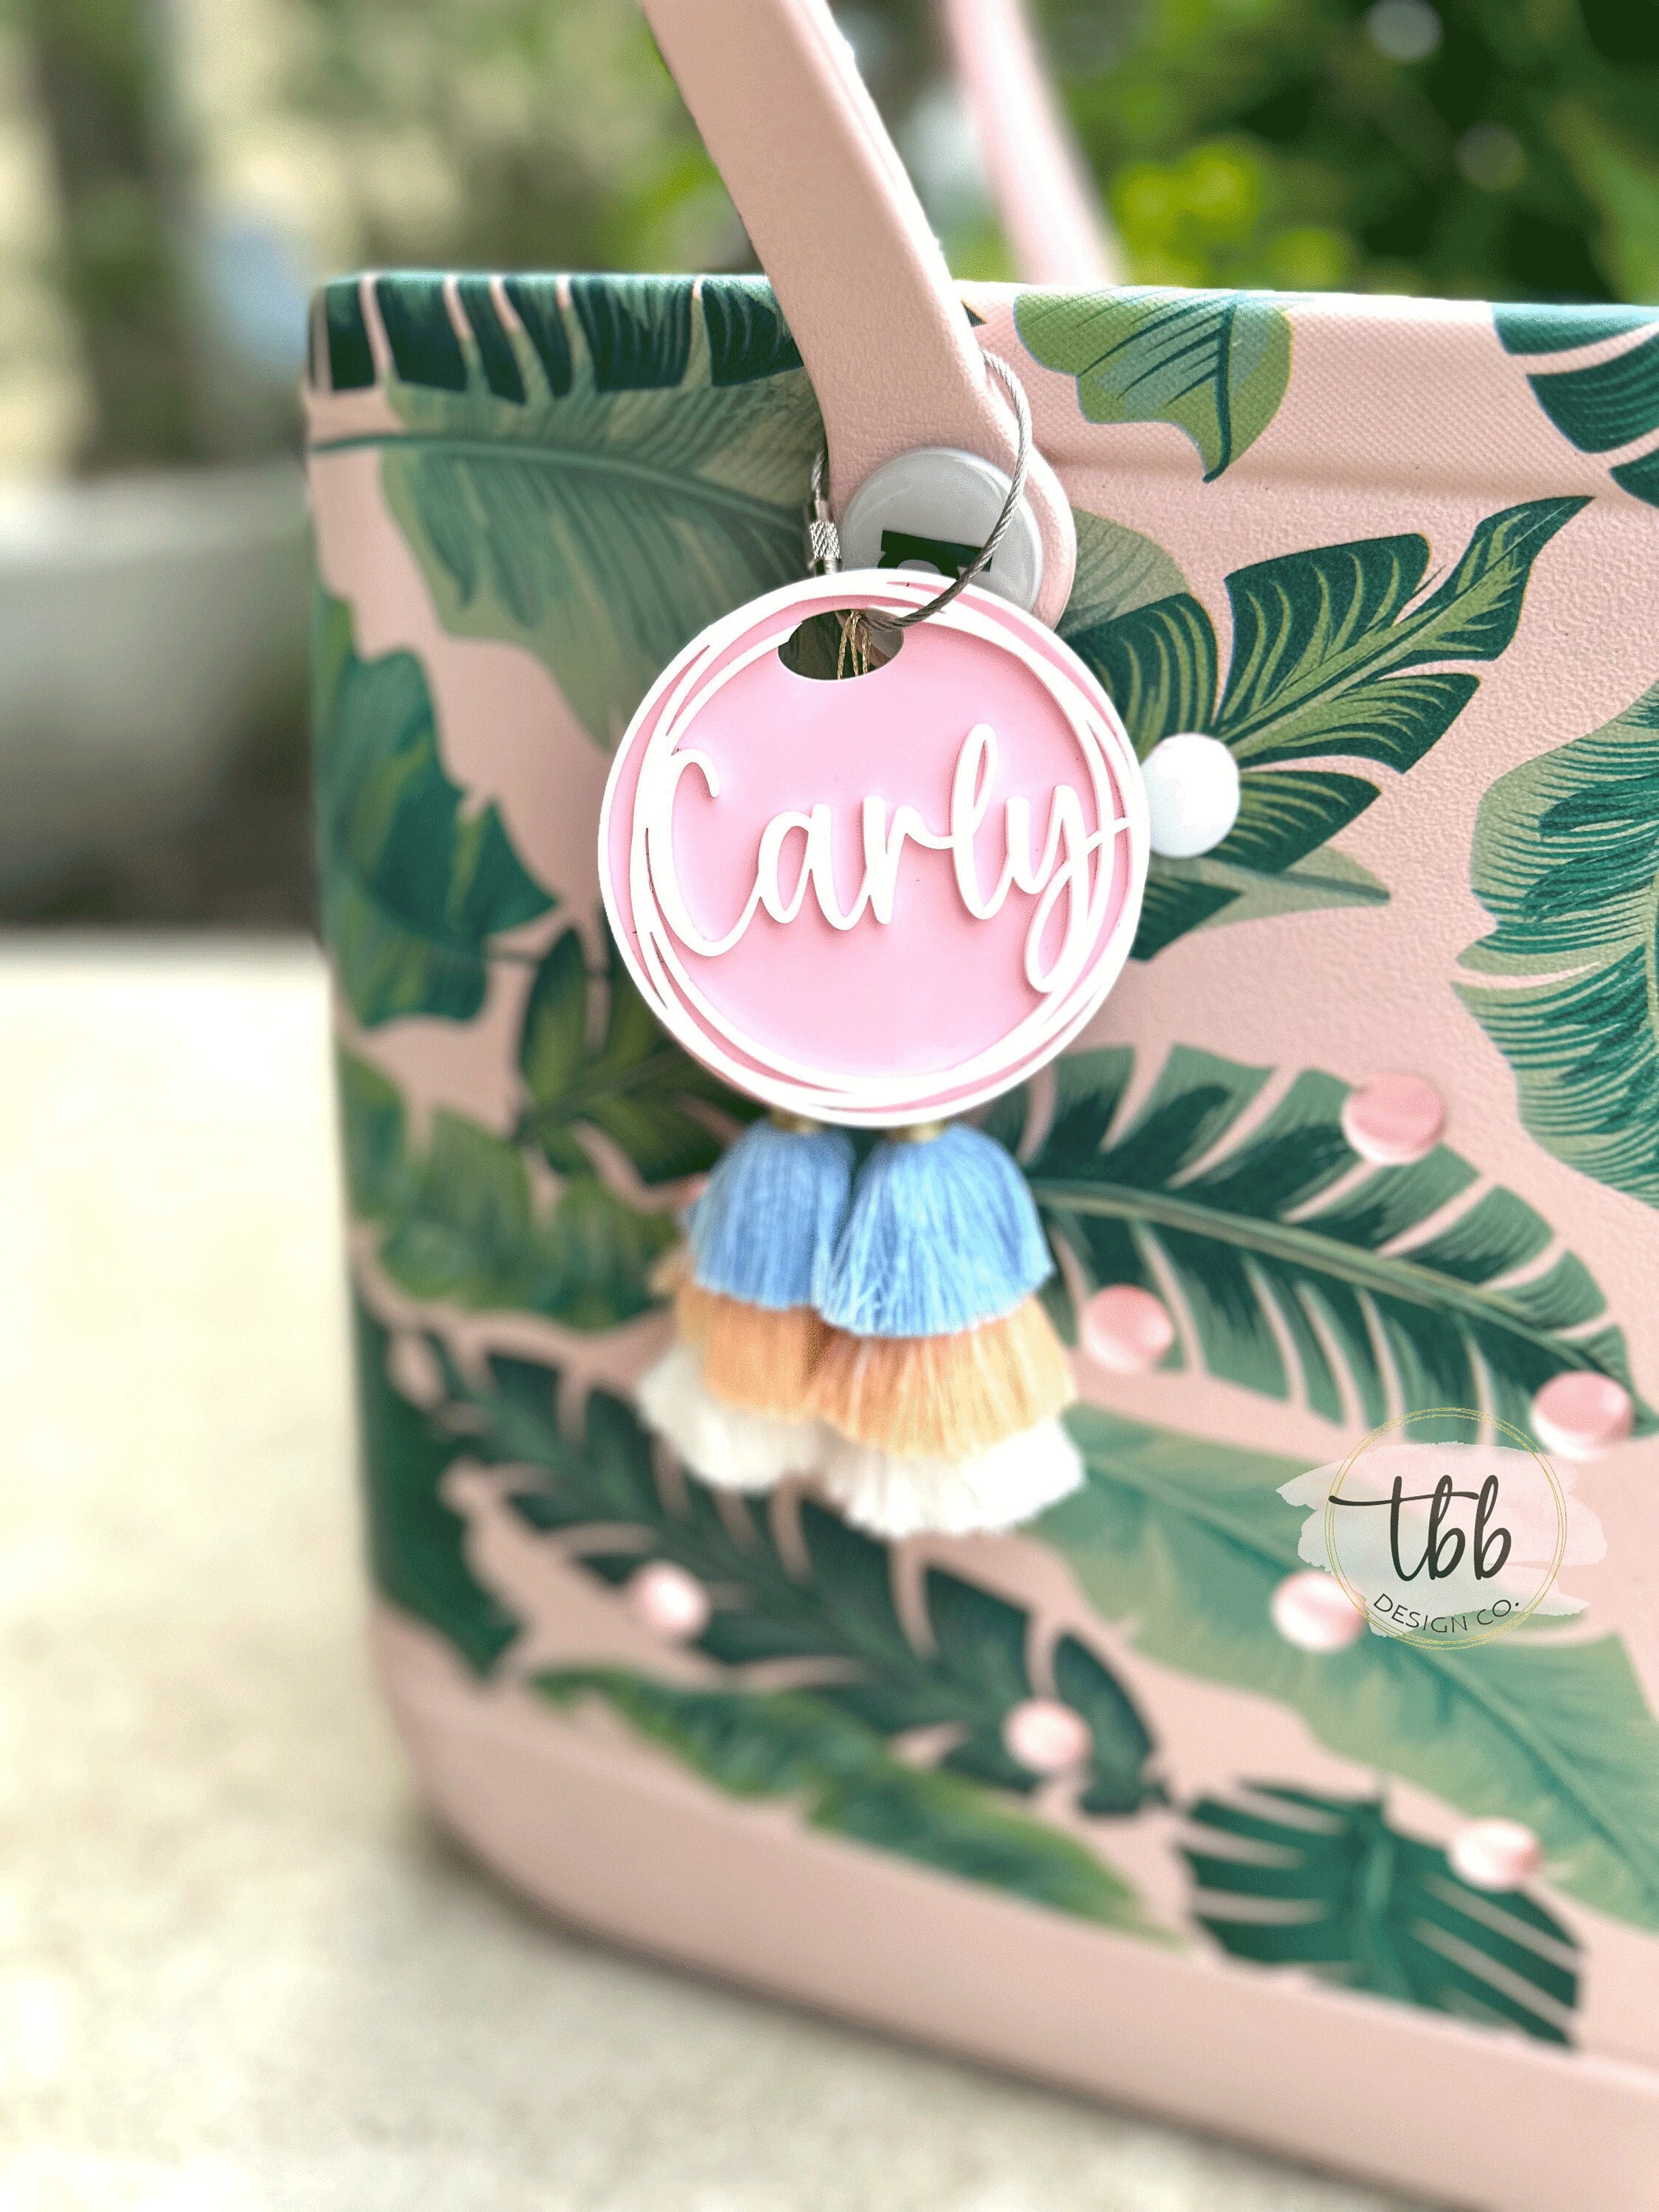 15 Super Cute Bag Charms You Need To Hang From Your Bag Right Now